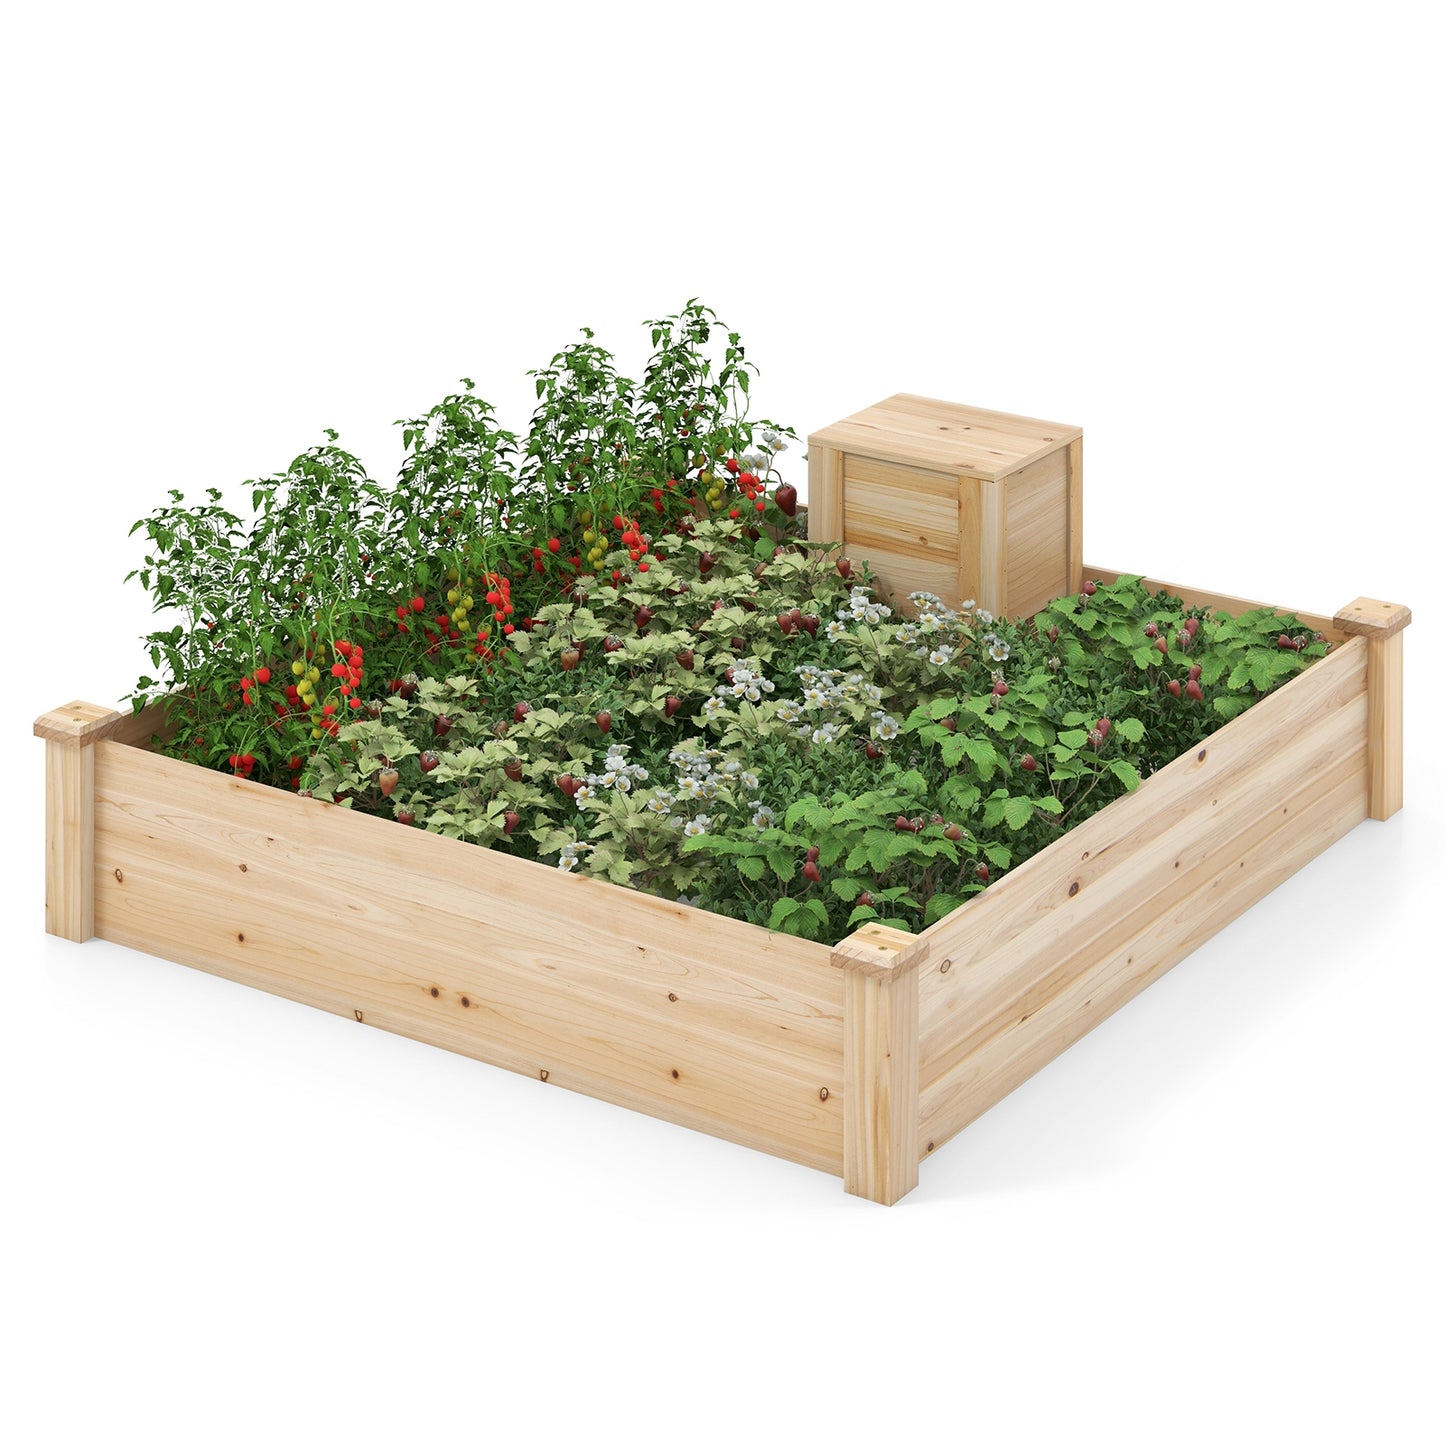 49" x 49" x 10" Raised Garden Bed with Compost Bin and Open-ended Bottom-Natural